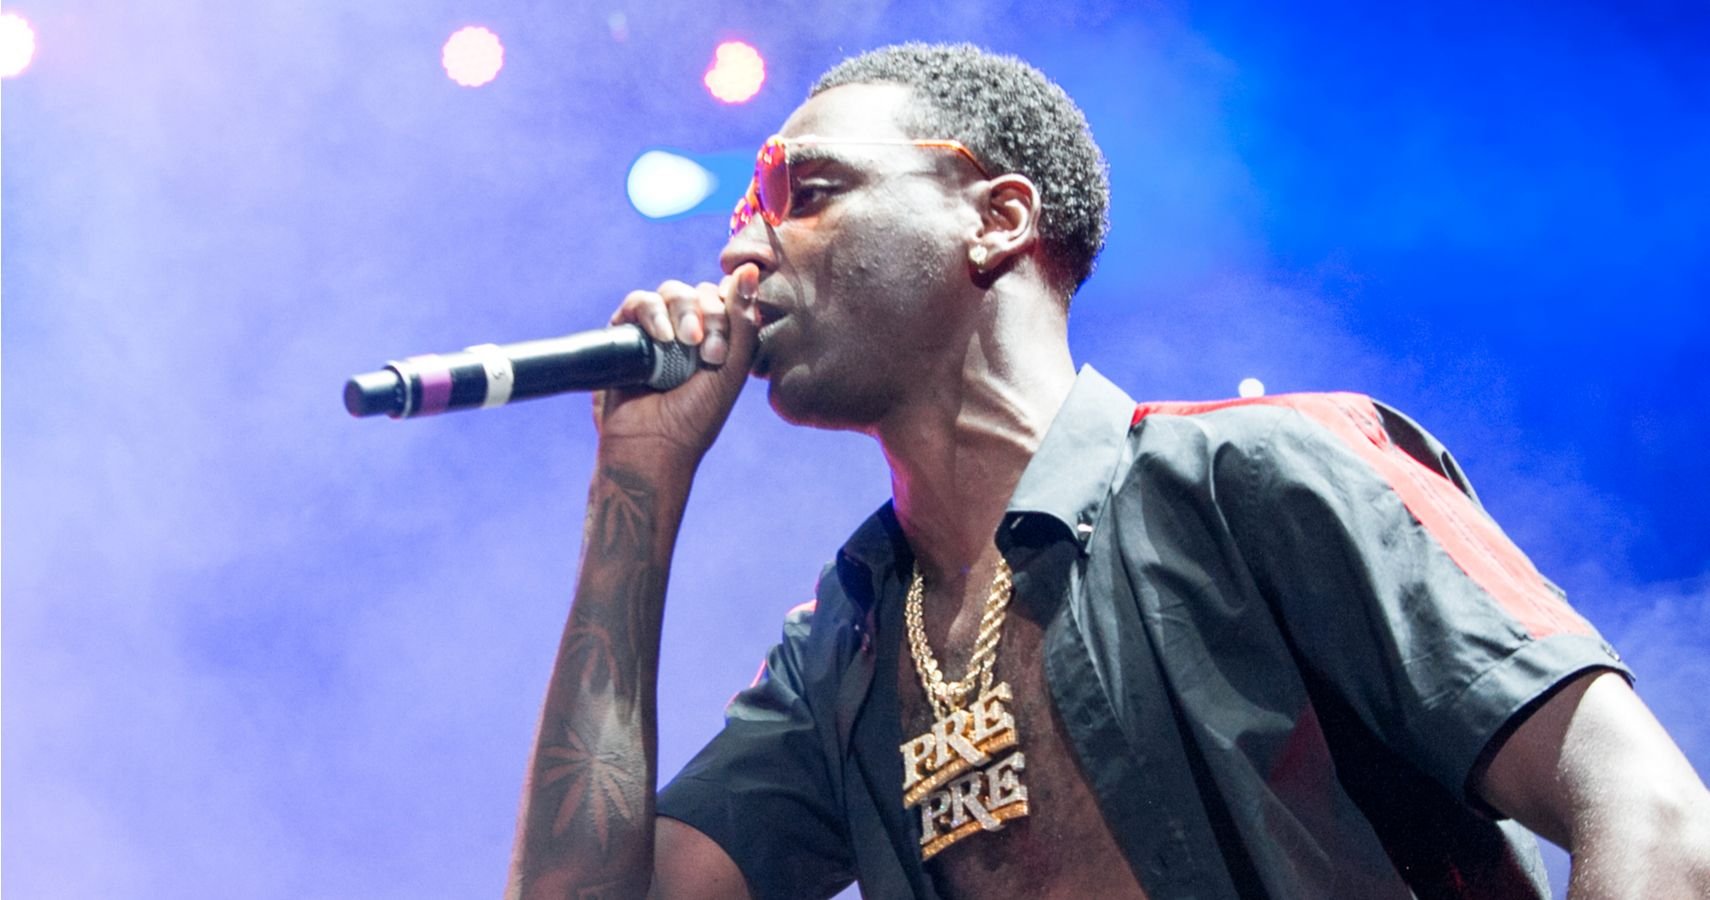 Gang Violence Or Simply Jealousy: Rapper Young Dolph Shot And Killed At 36